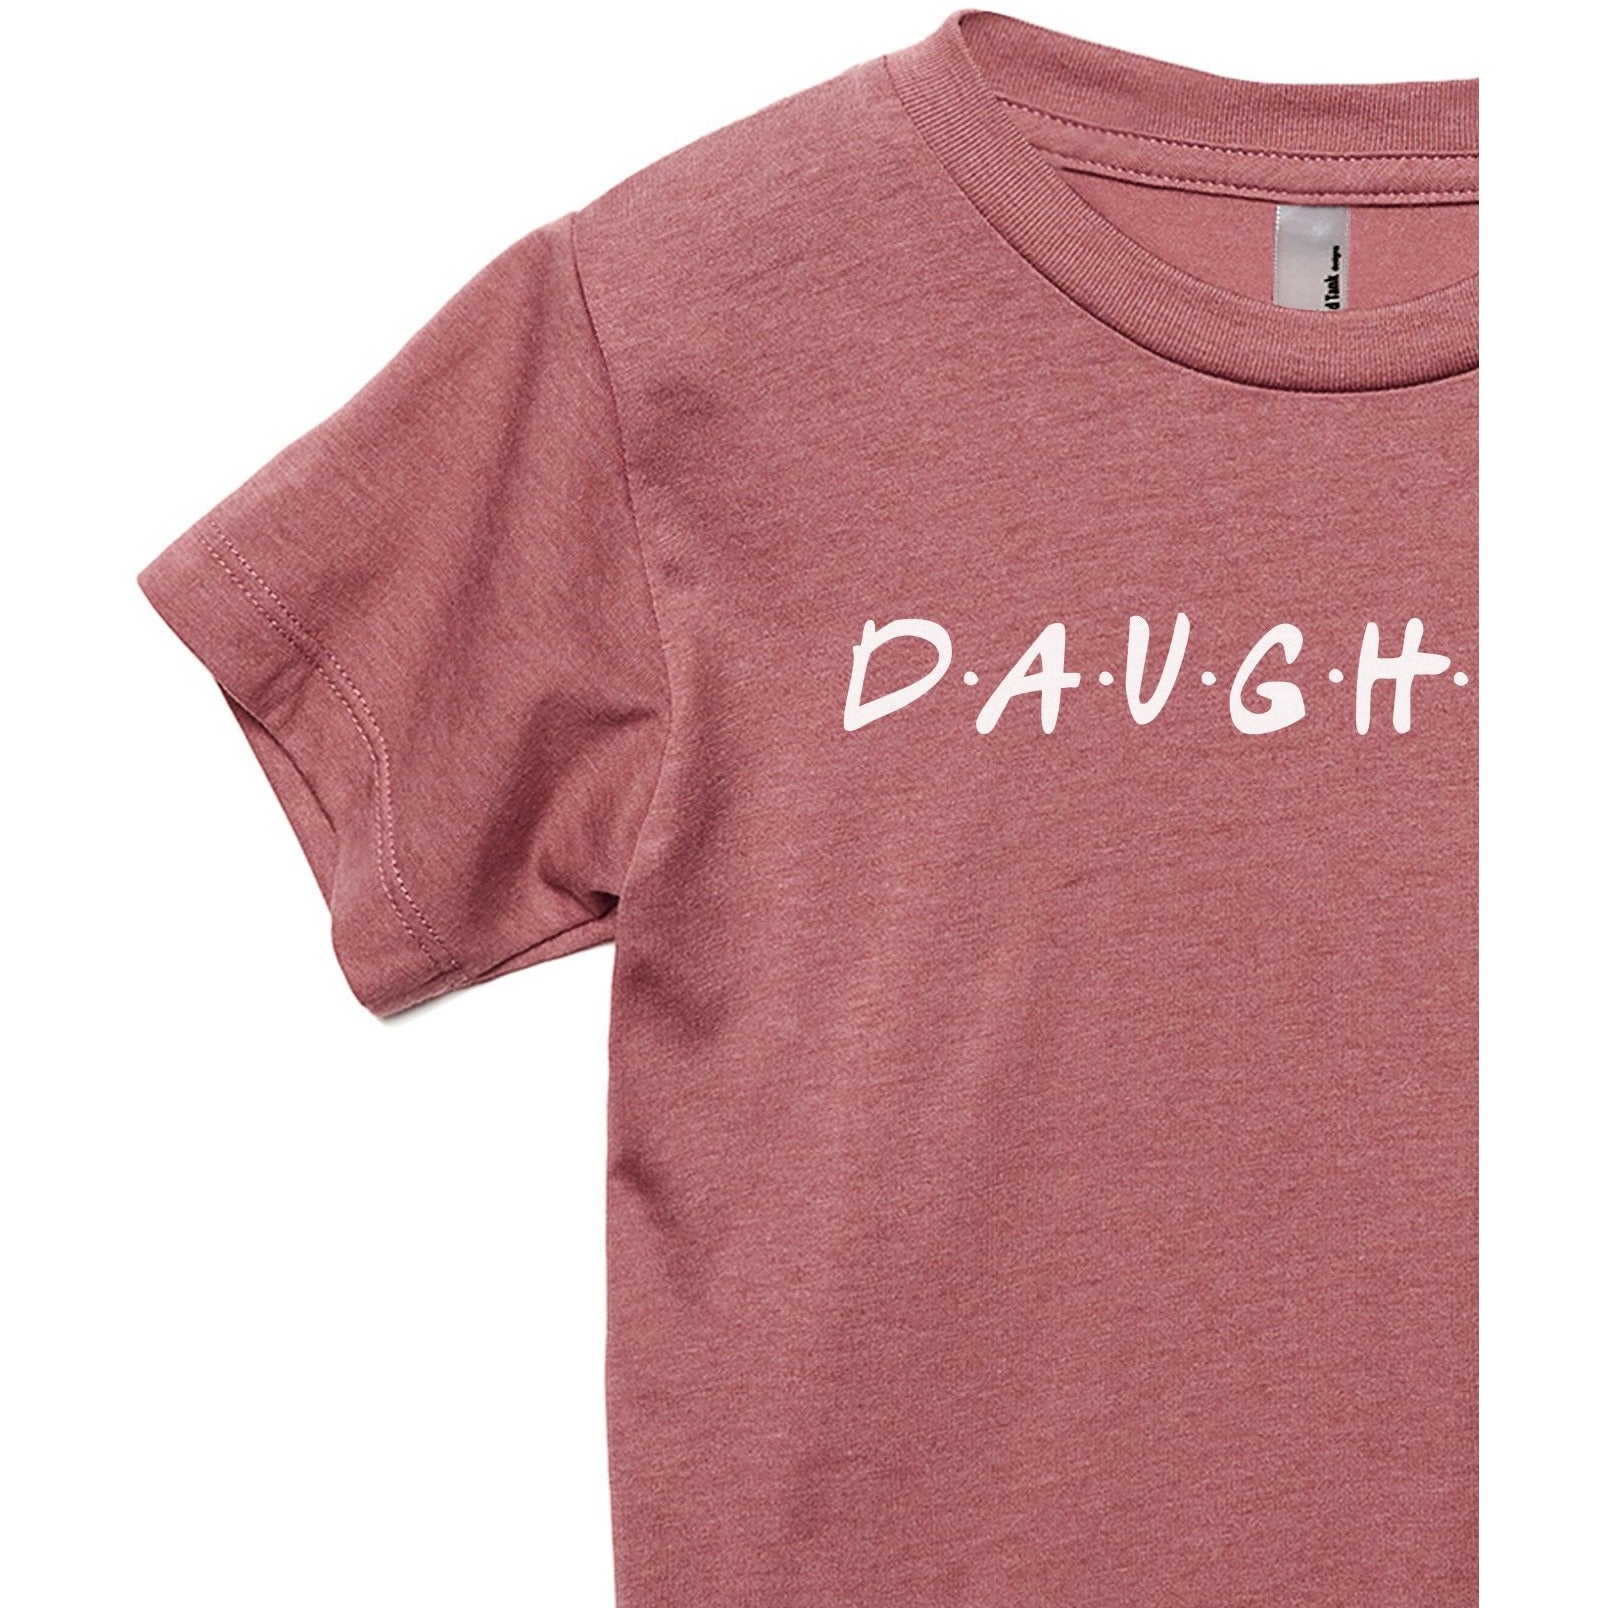 Daughter Friends Toddler's Go-To Crewneck Tee Heather Rouge Zoom Details A